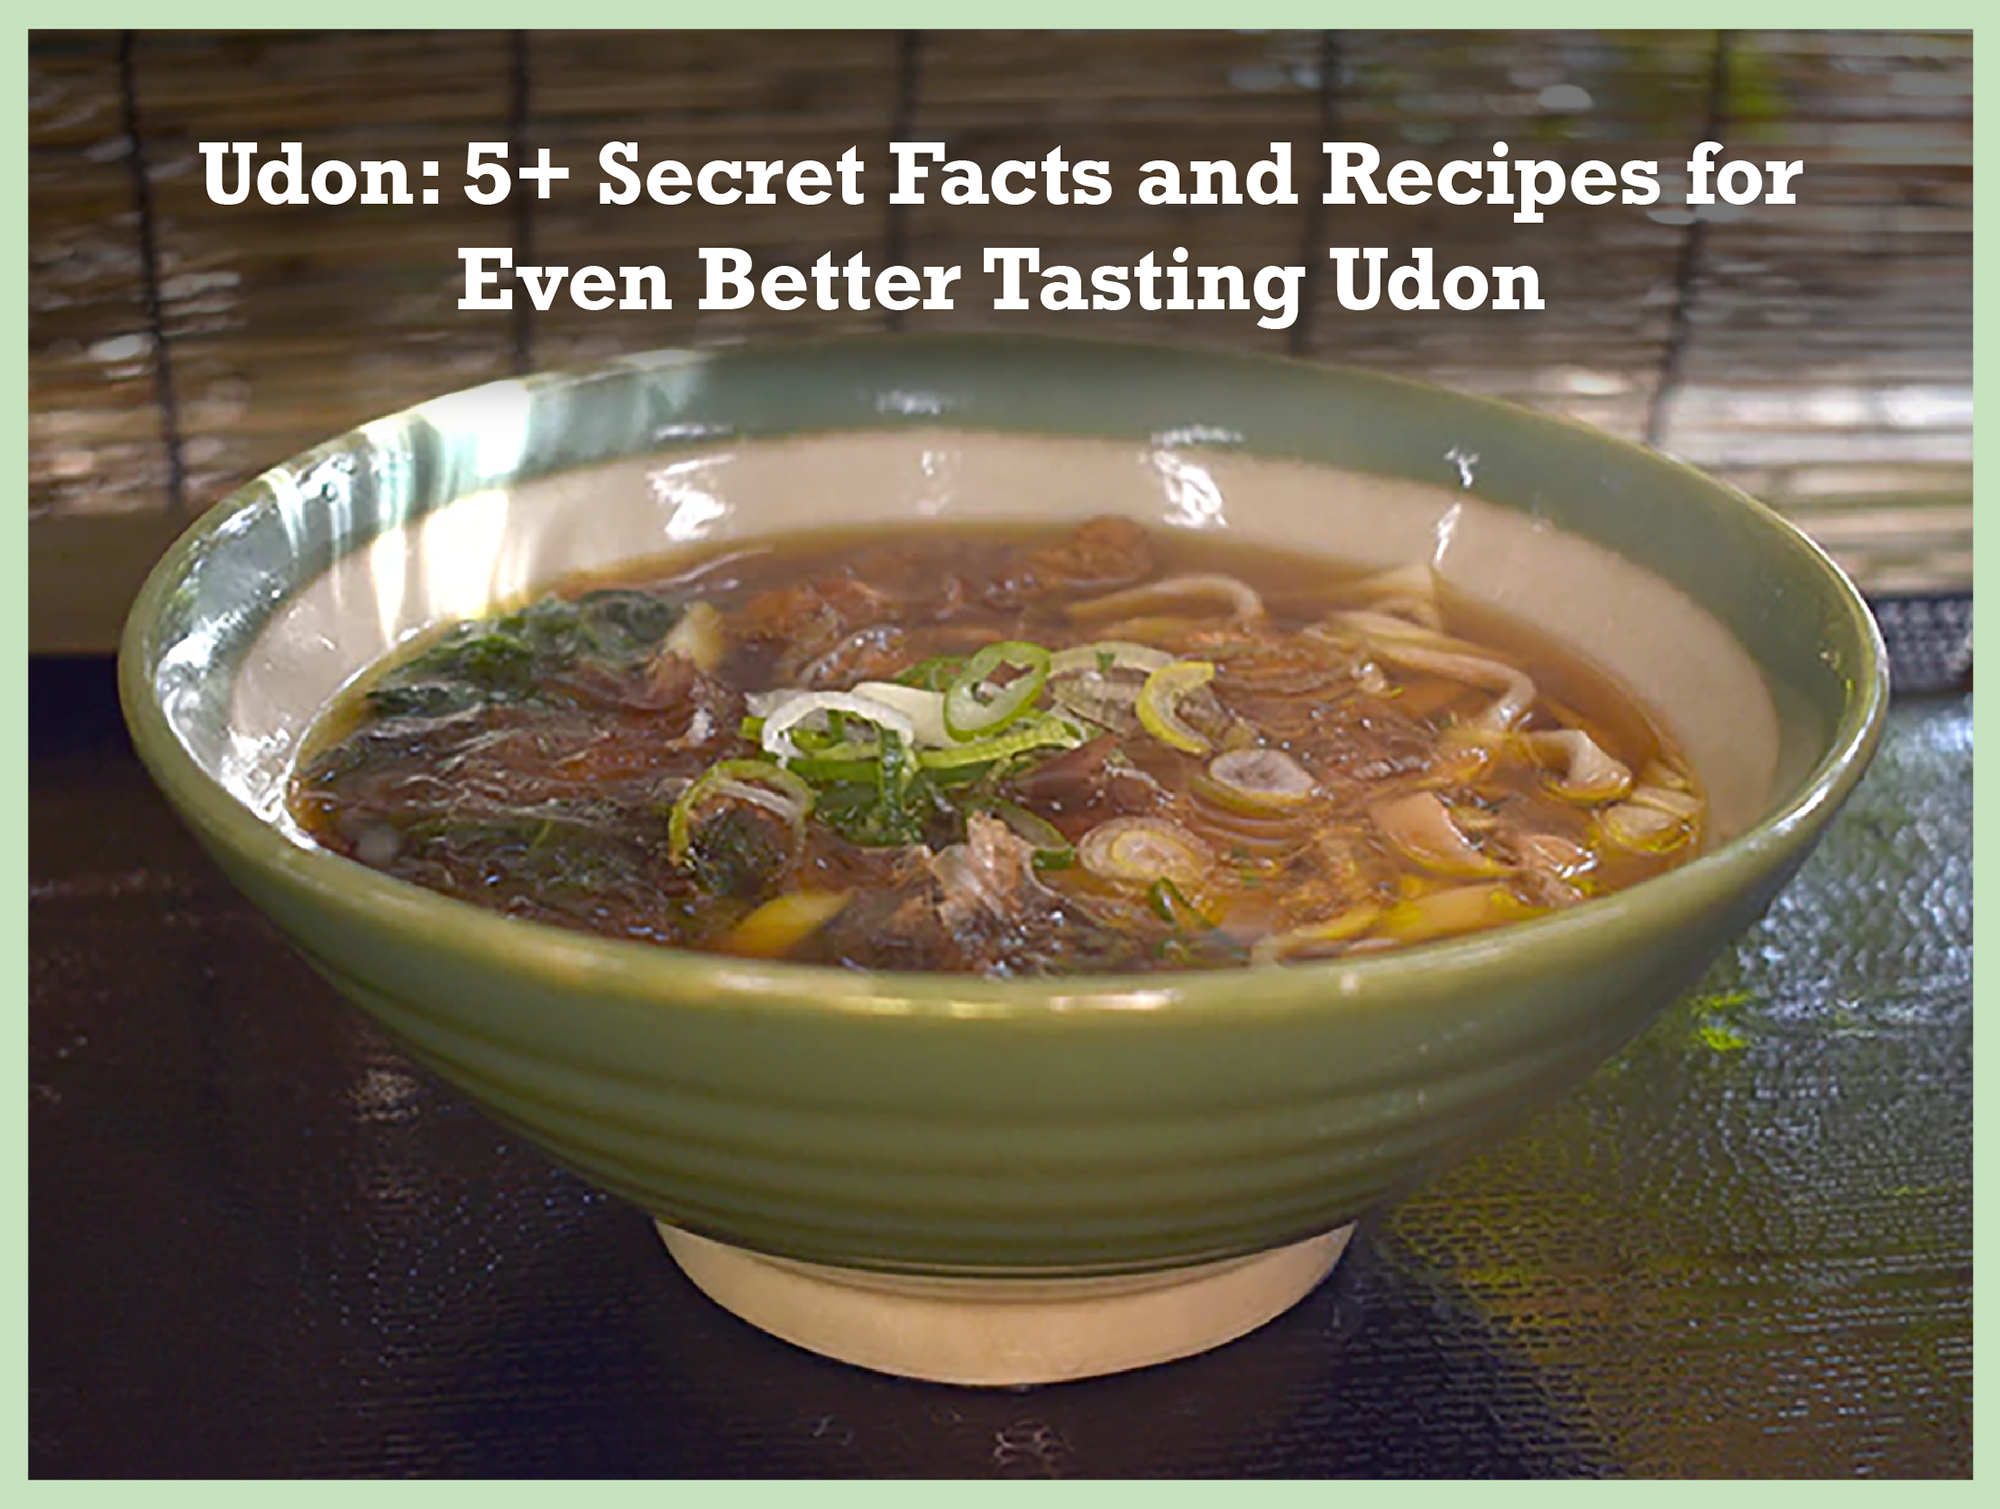 Udon: 5+ Secret Facts and Recipes for Even Better Tasting Udon